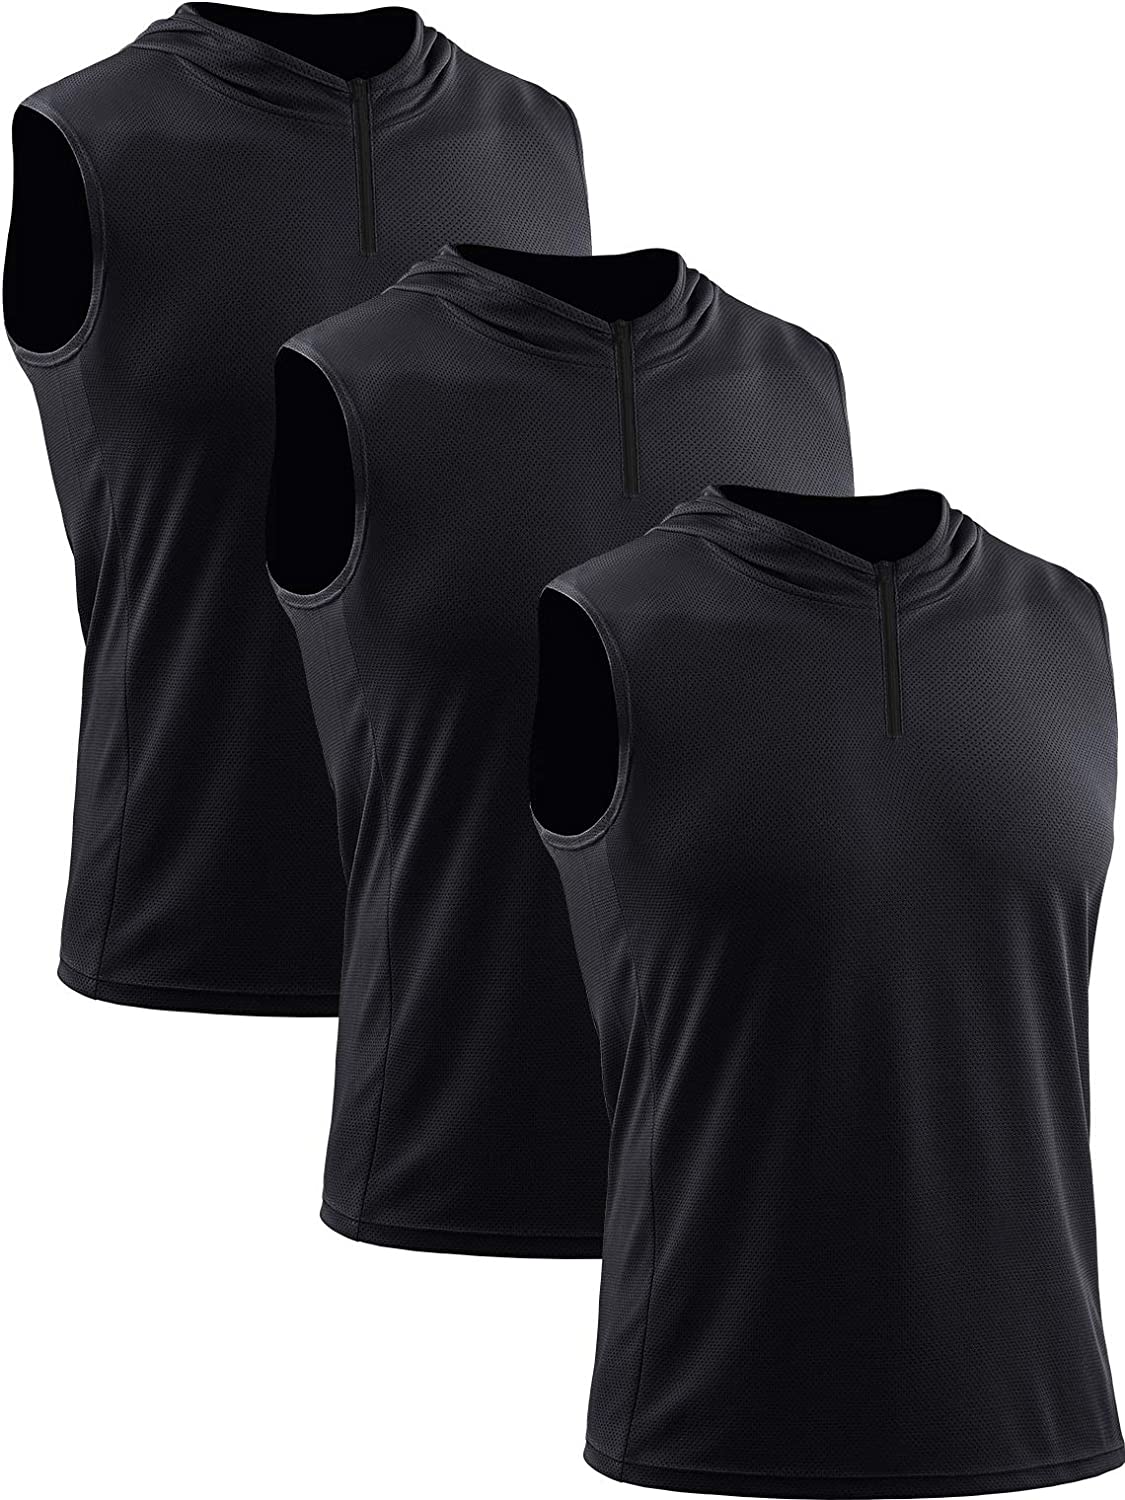 Neleus Men's Running Tank Tops 3 Pack Sleeveless Workout Athletic Shirts with Hoods 